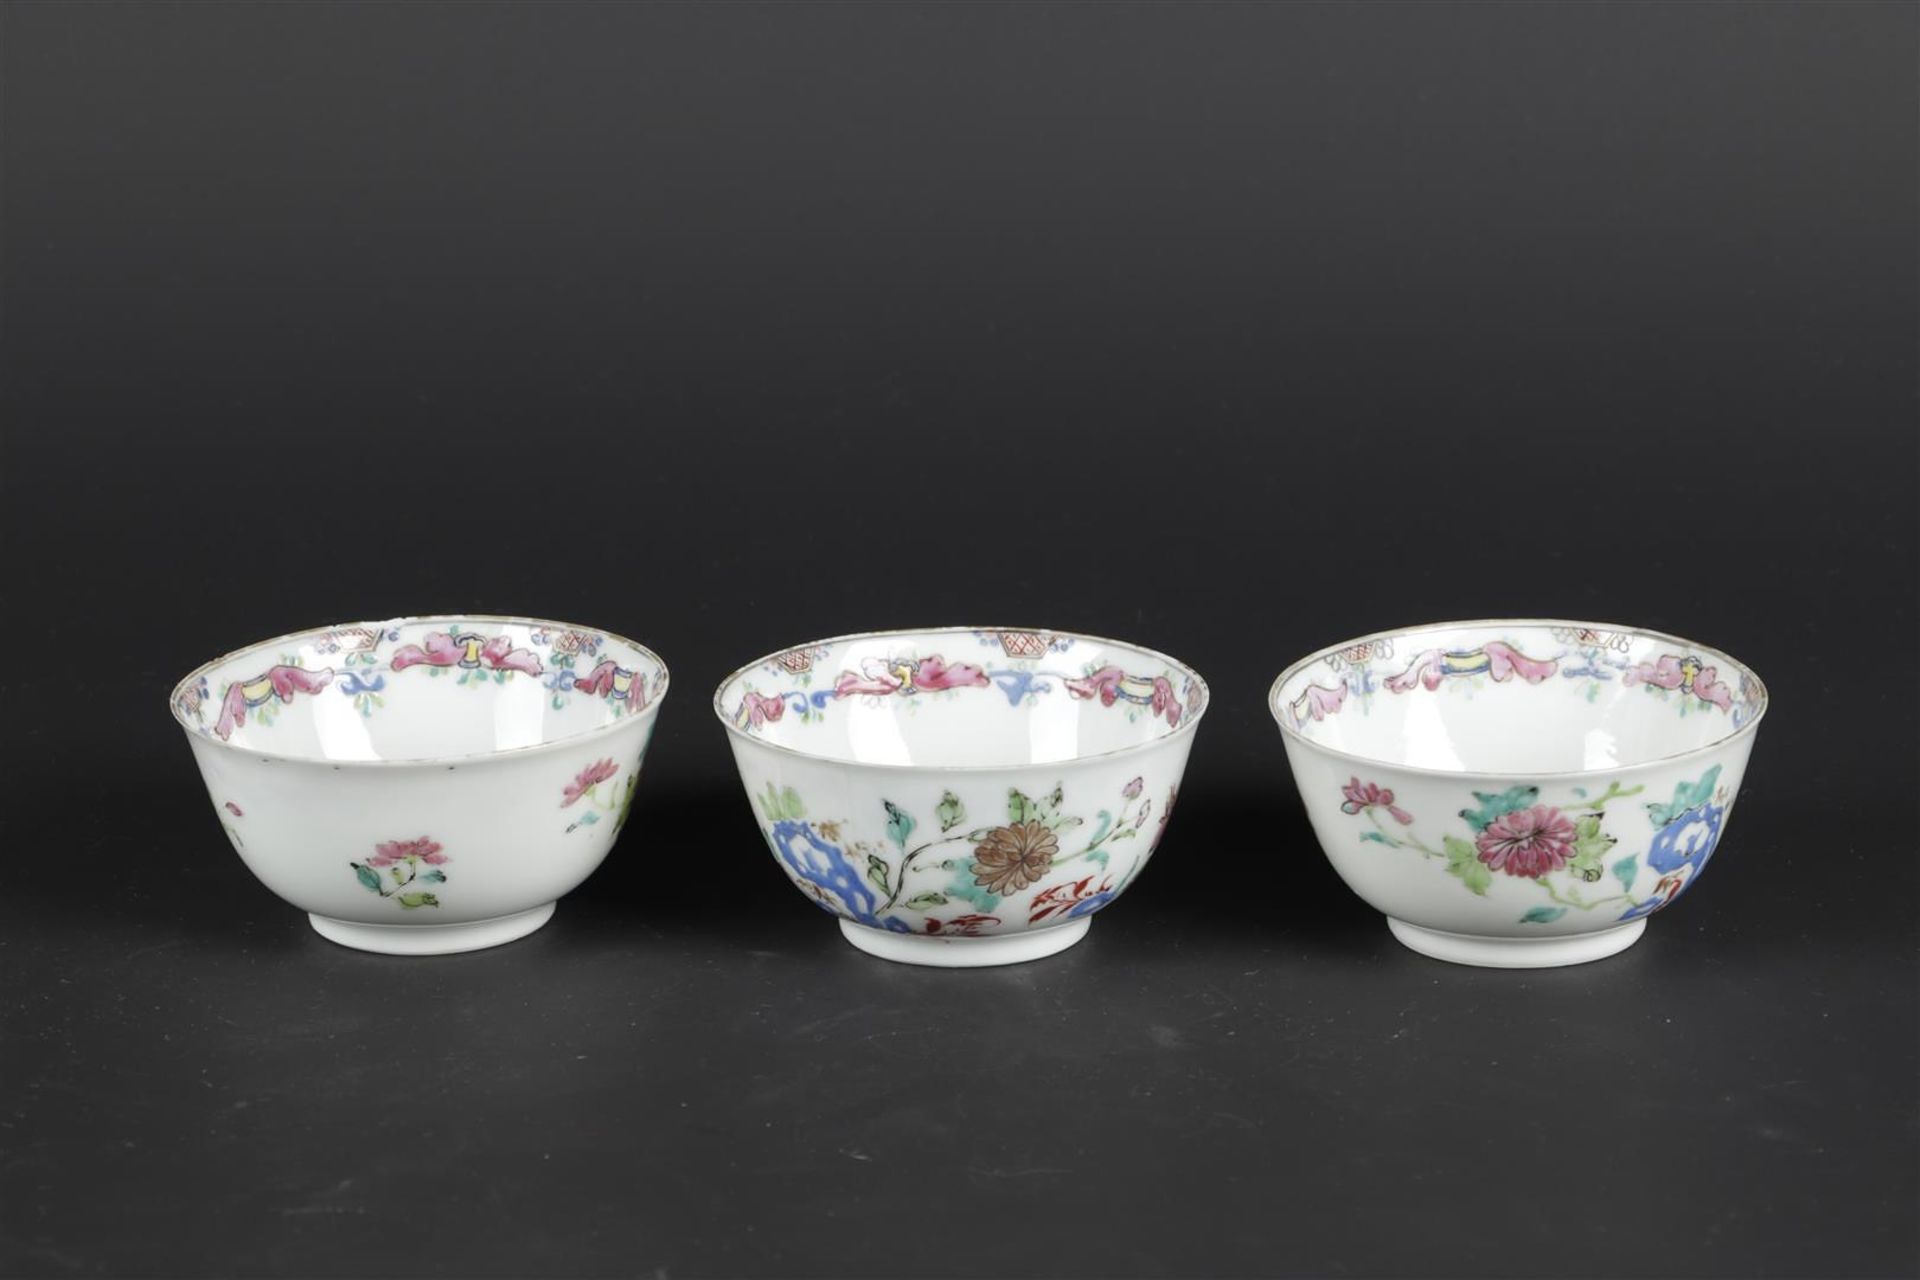 Three Famille Rose porcelain bowls with rich floral decoration. China, Yongzheng.